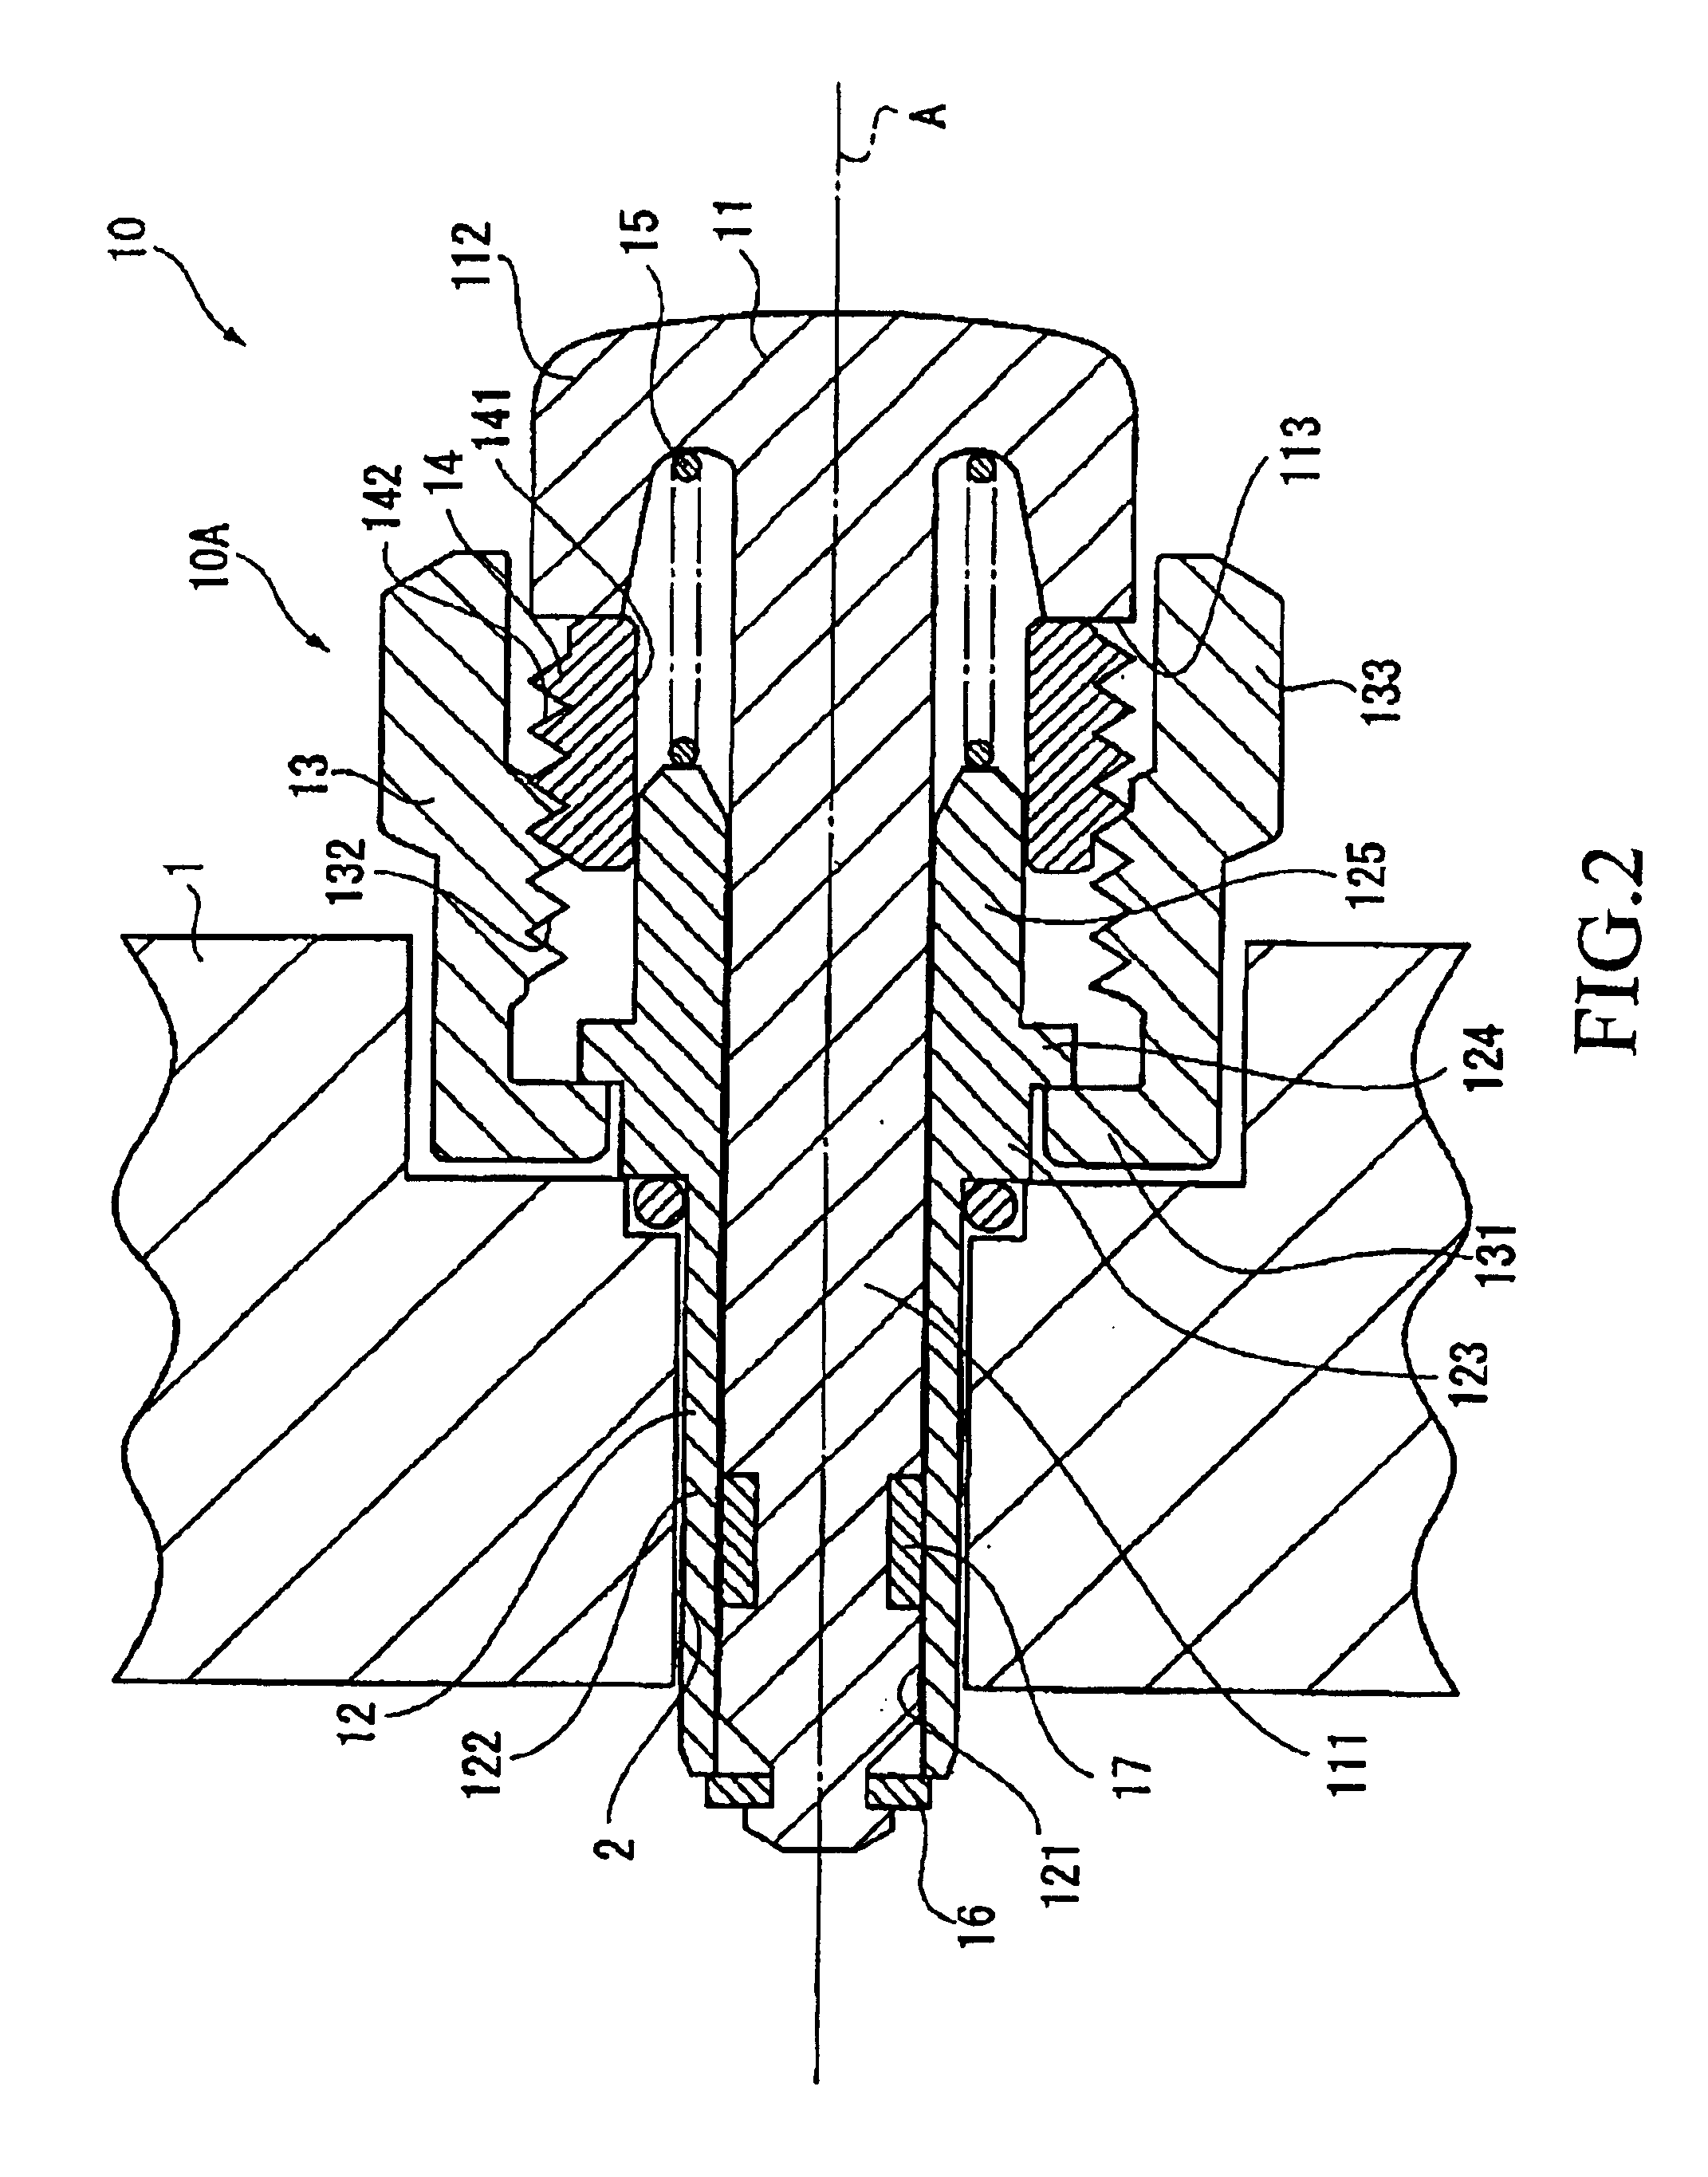 Lockable pushbutton actuator for a display device such as a watch